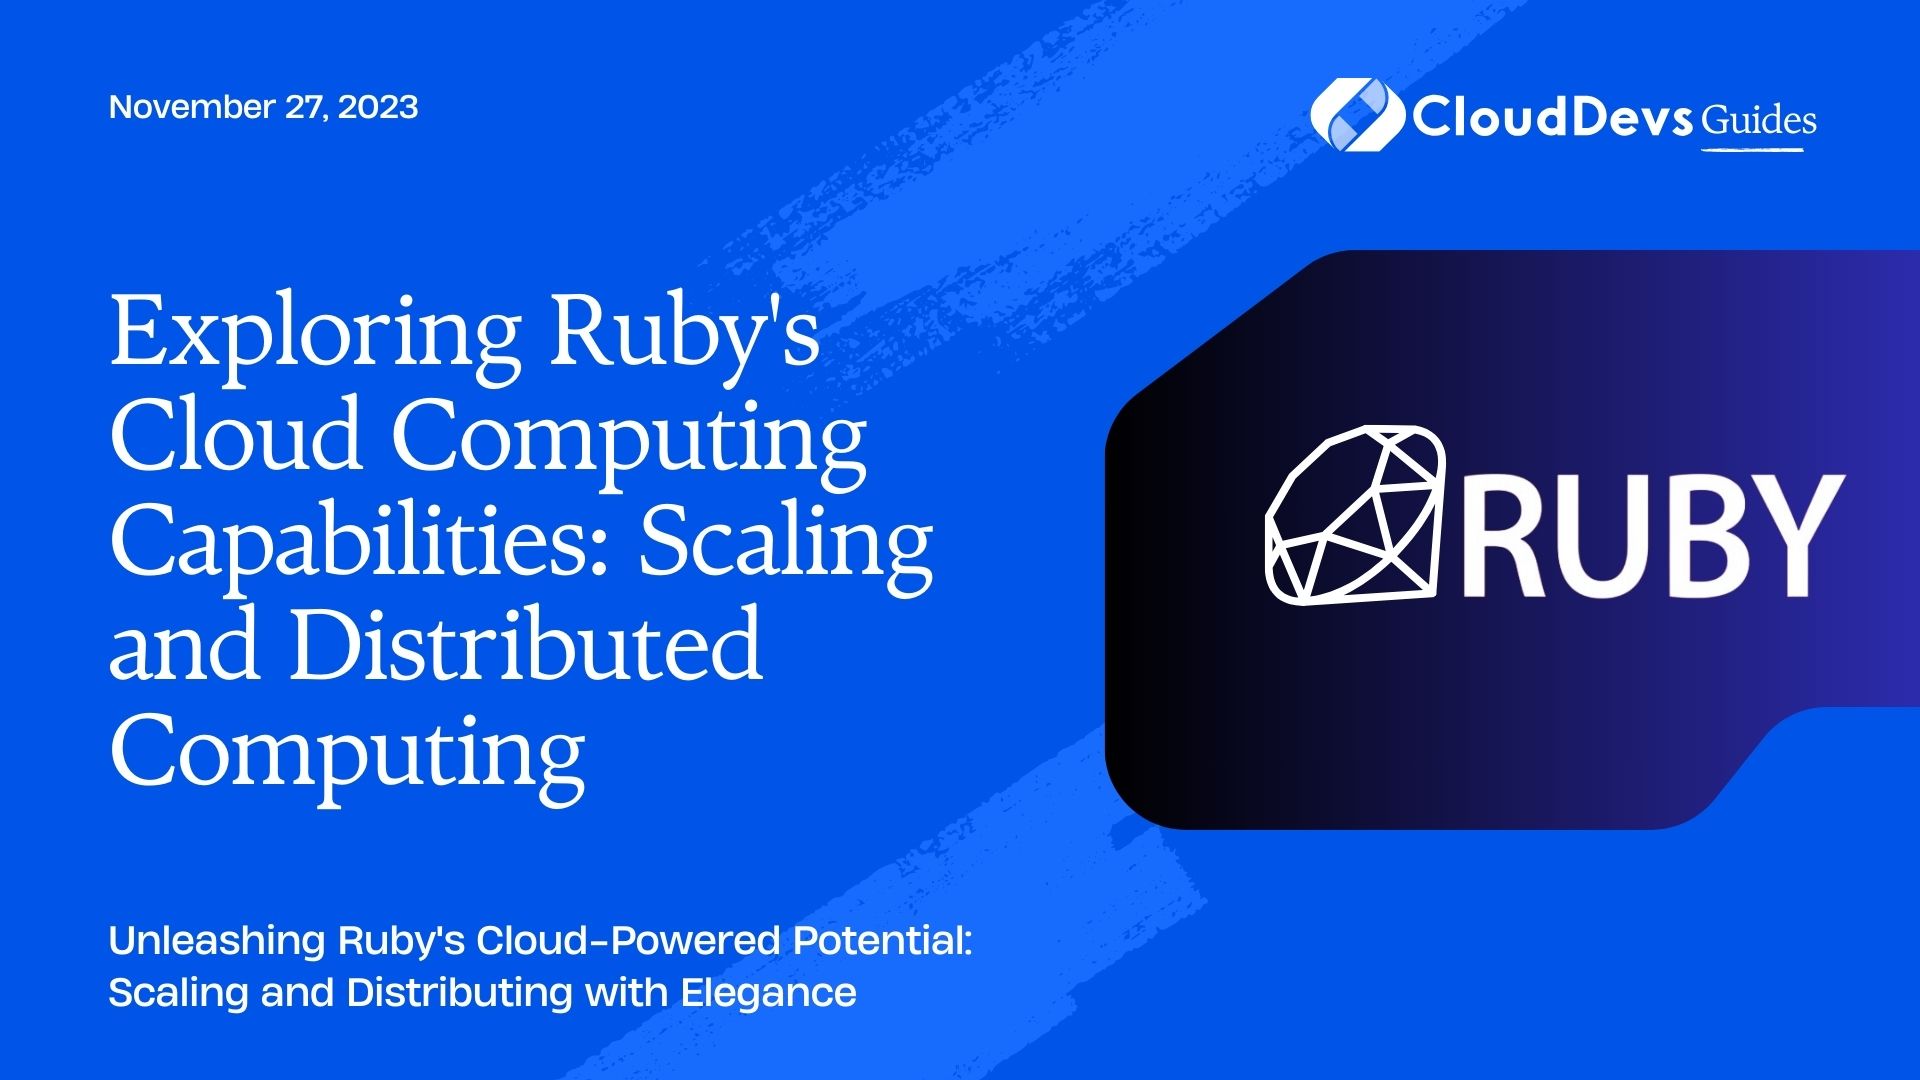 Exploring Ruby's Cloud Computing Capabilities: Scaling and Distributed Computing